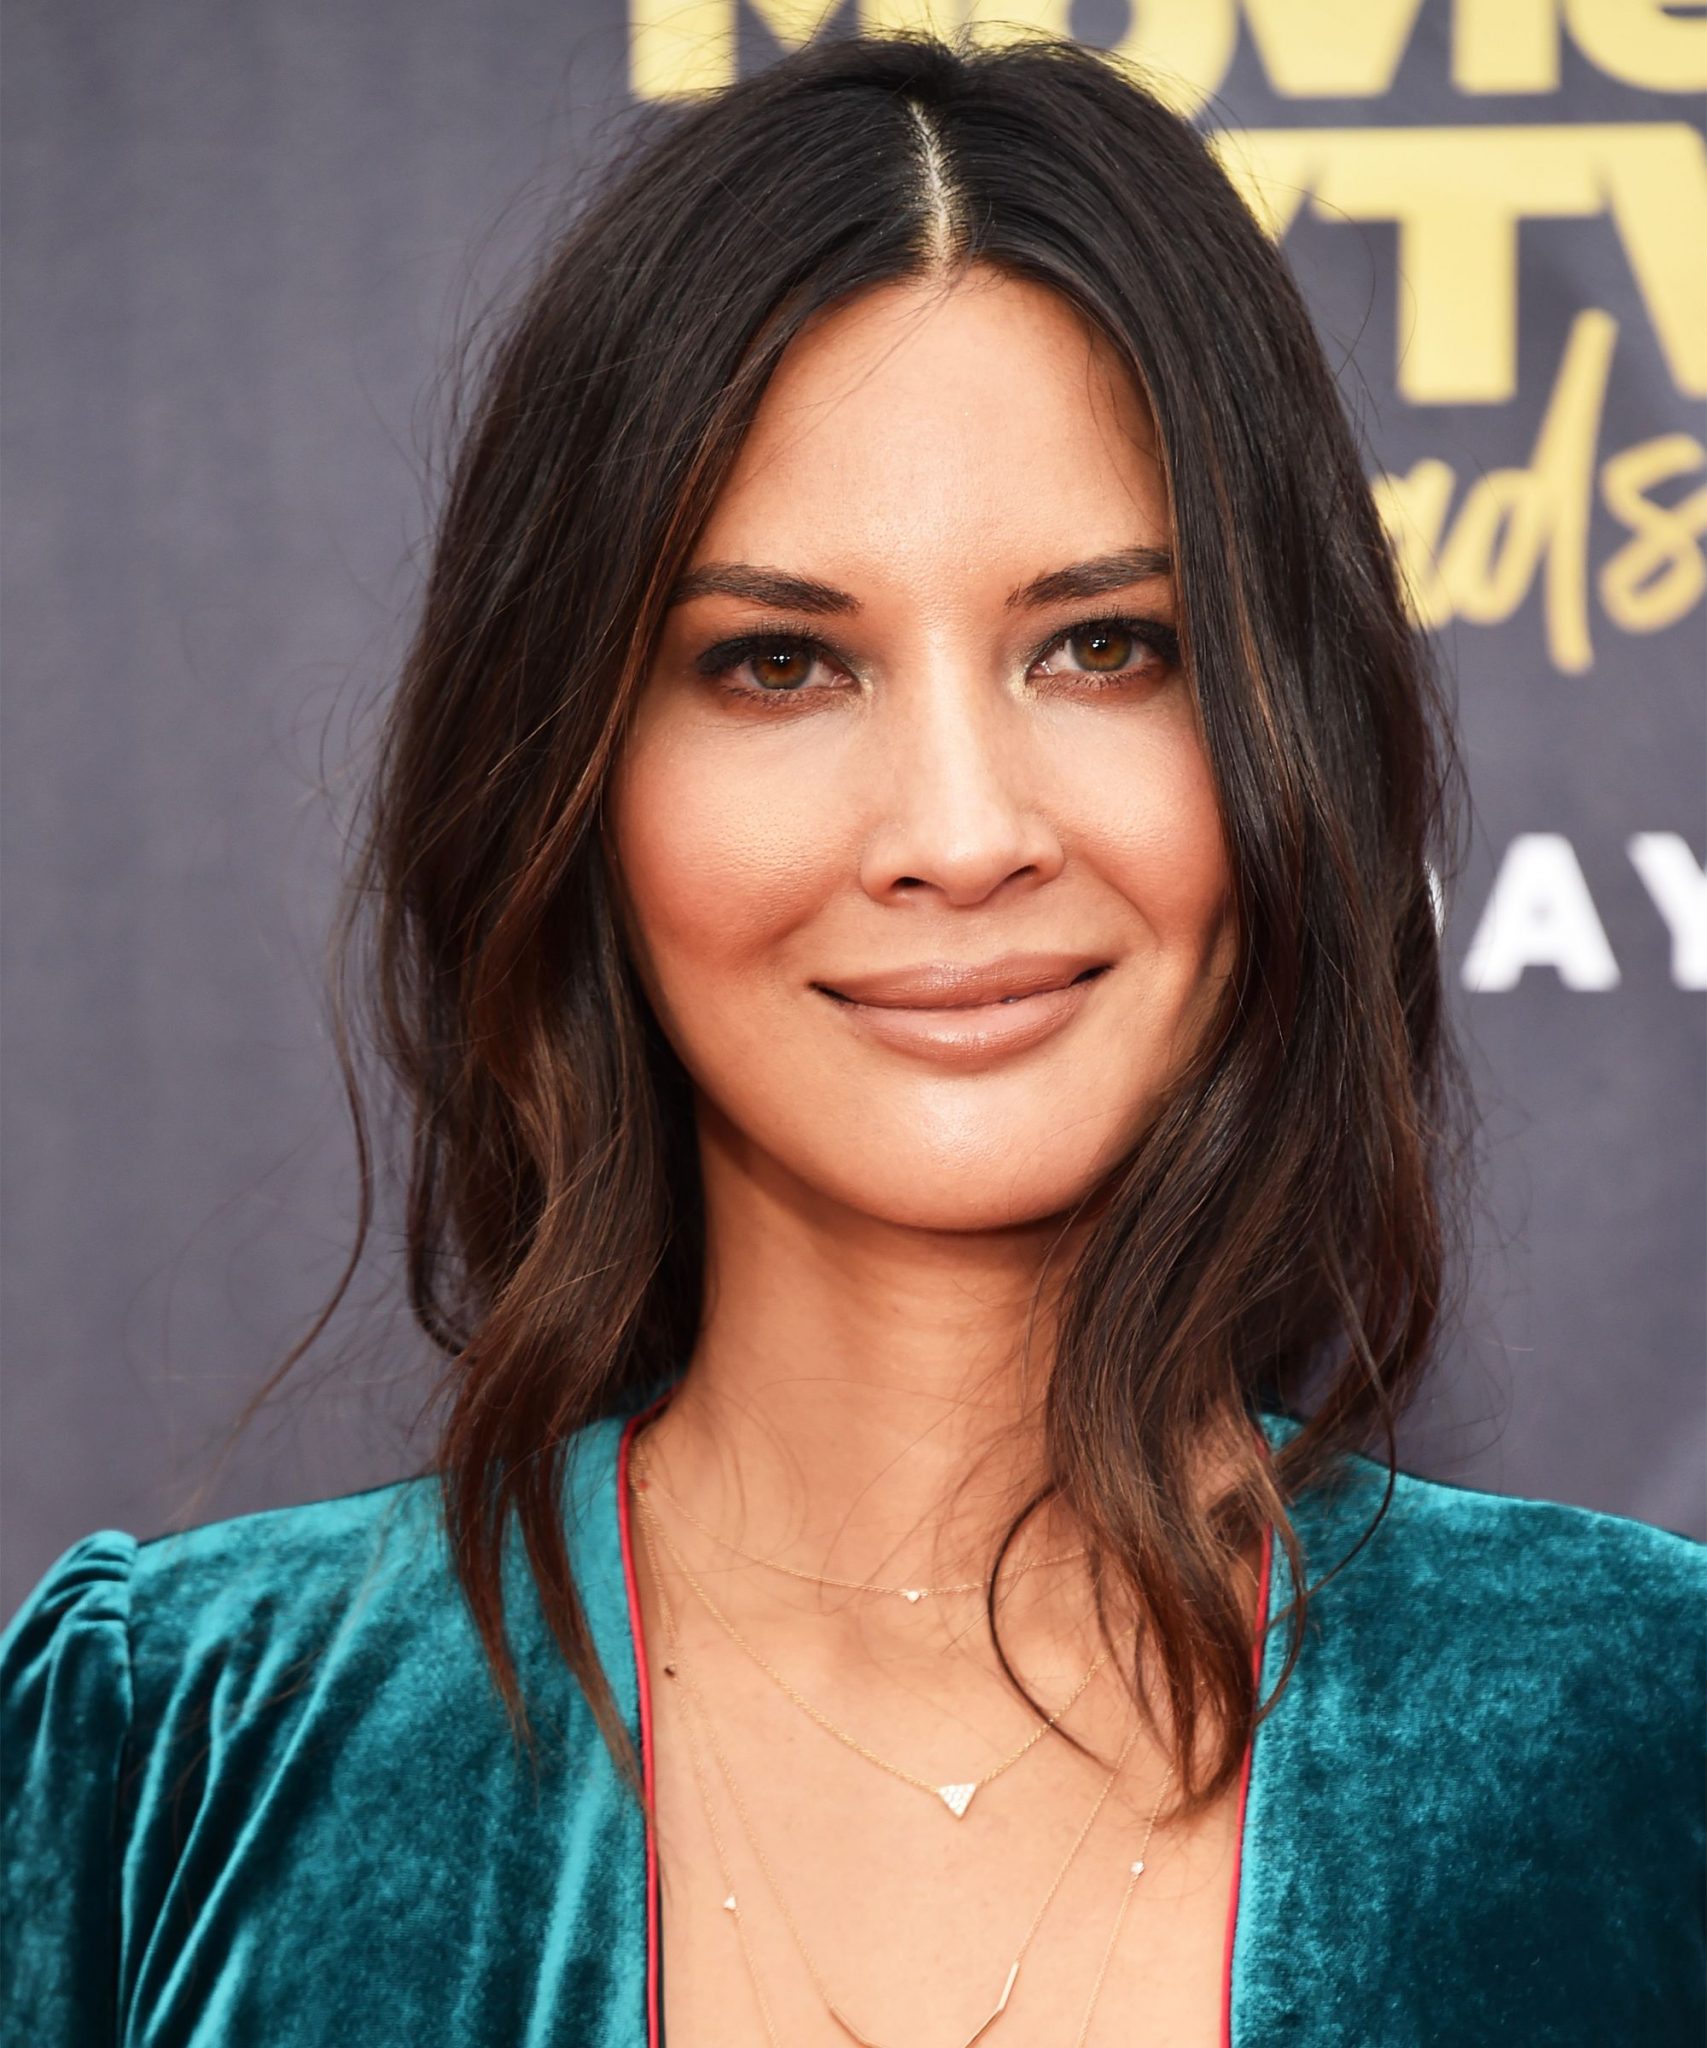 the best beauty looks from the mtv awards cost less than $15